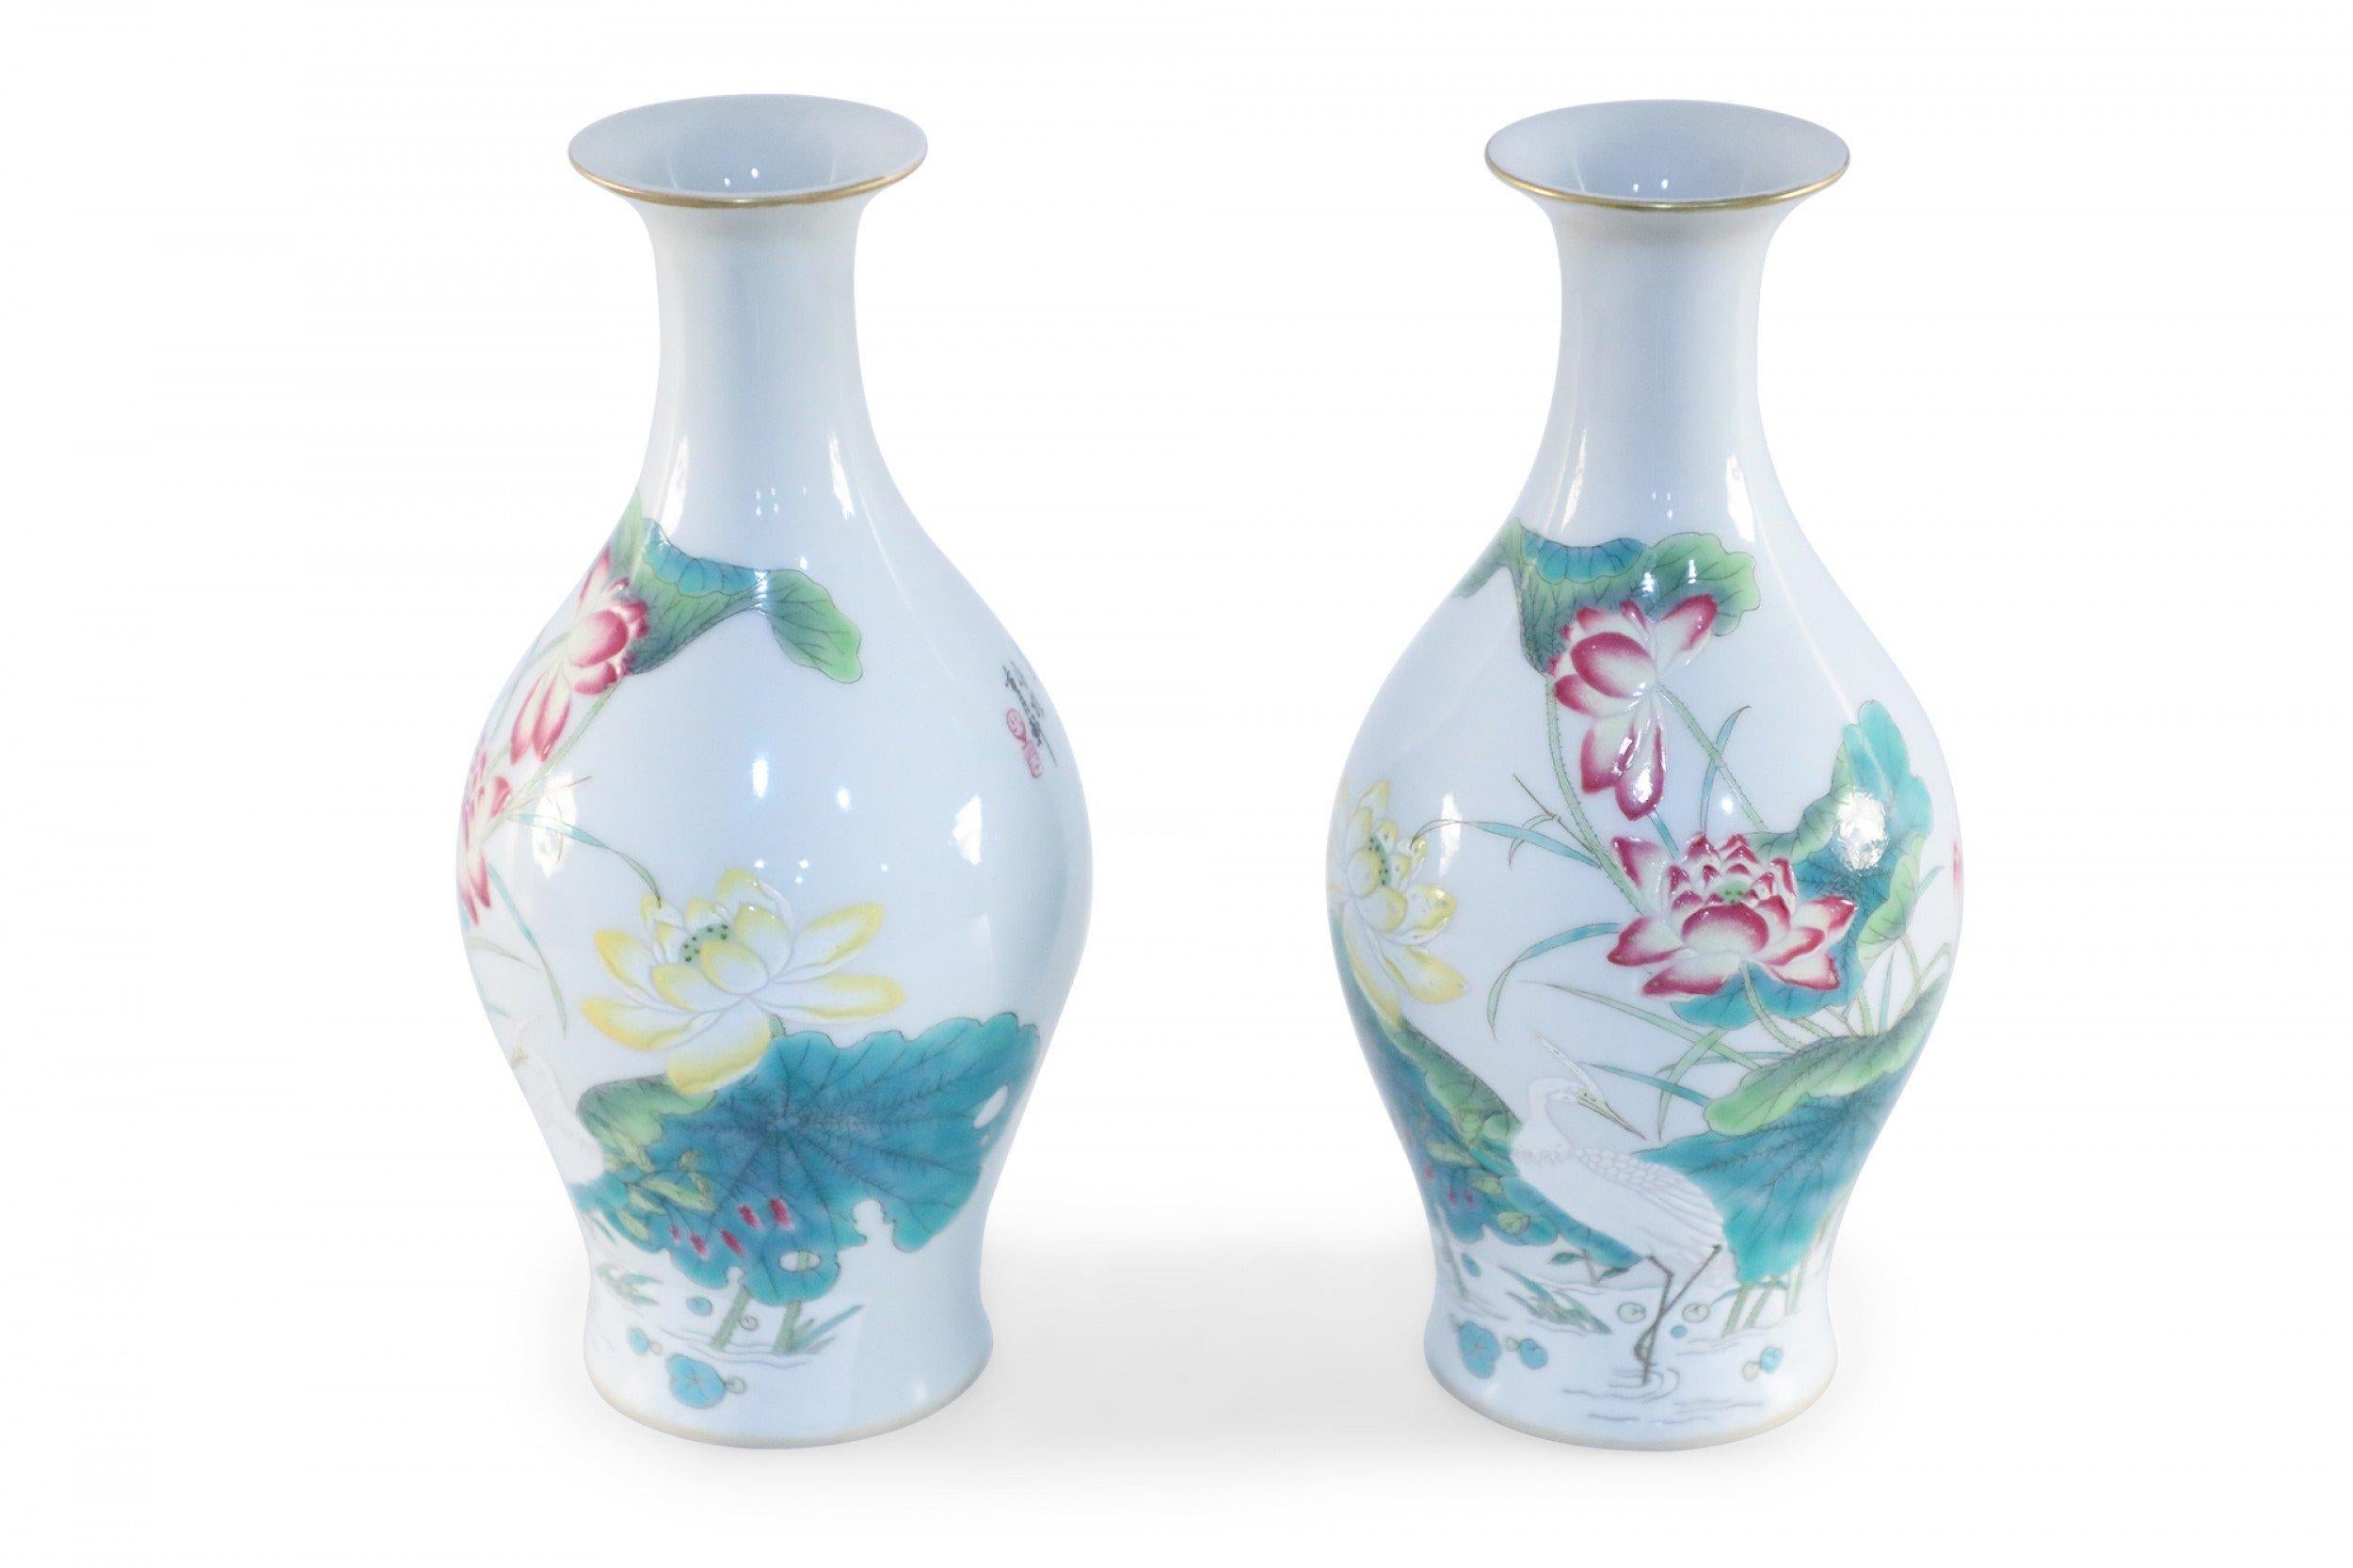 Chinese Export Pair of Chinese White Famille Rose Pear-Shaped Porcelain Vases